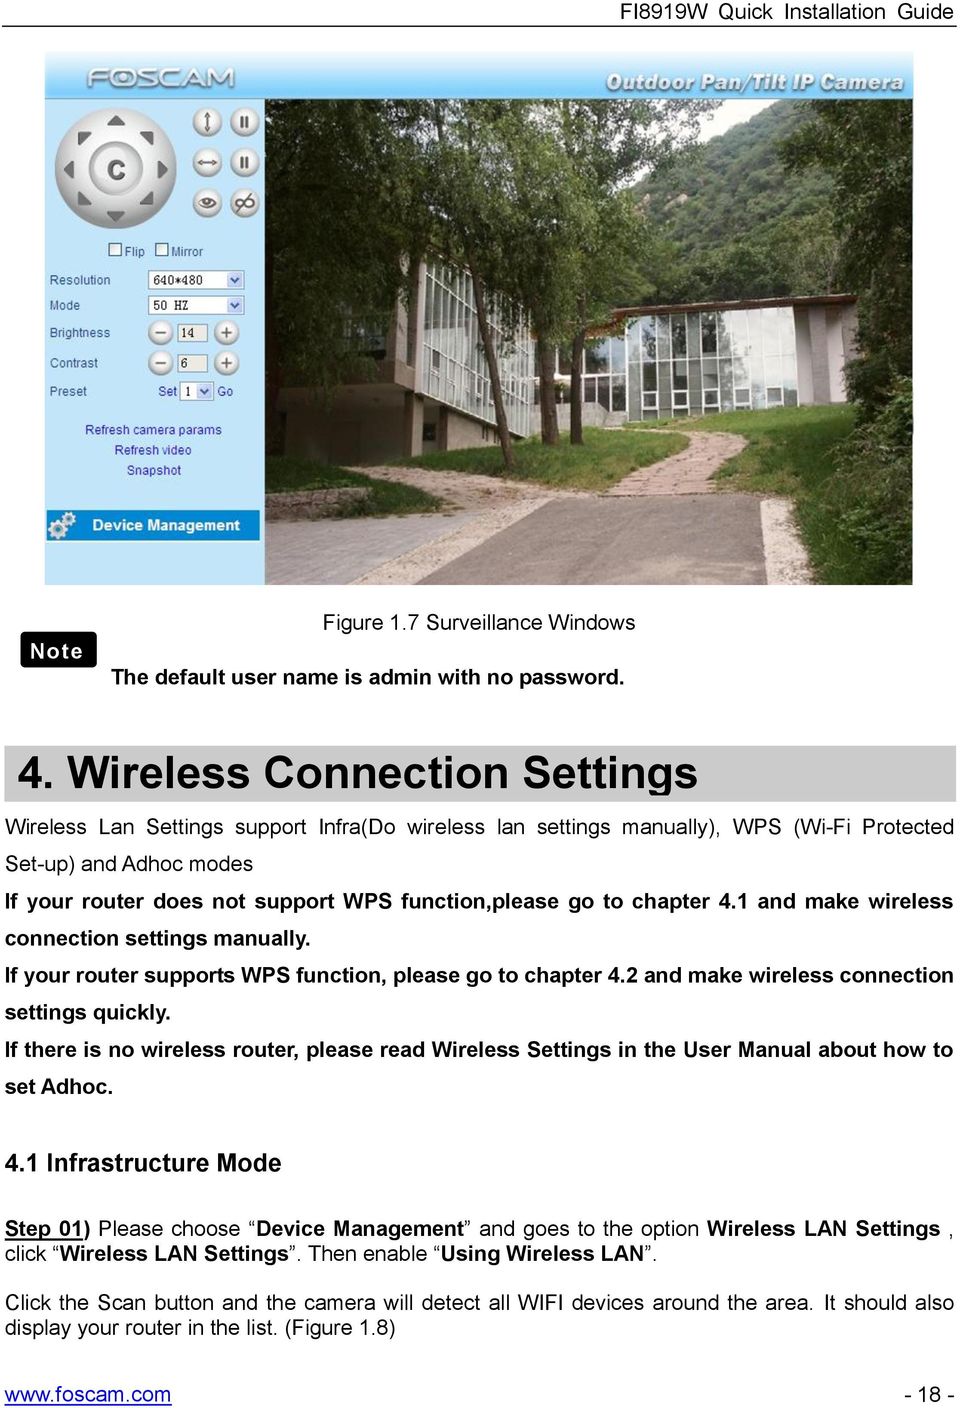 go to chapter 4.1 and make wireless connection settings manually. If your router supports WPS function, please go to chapter 4.2 and make wireless connection settings quickly.